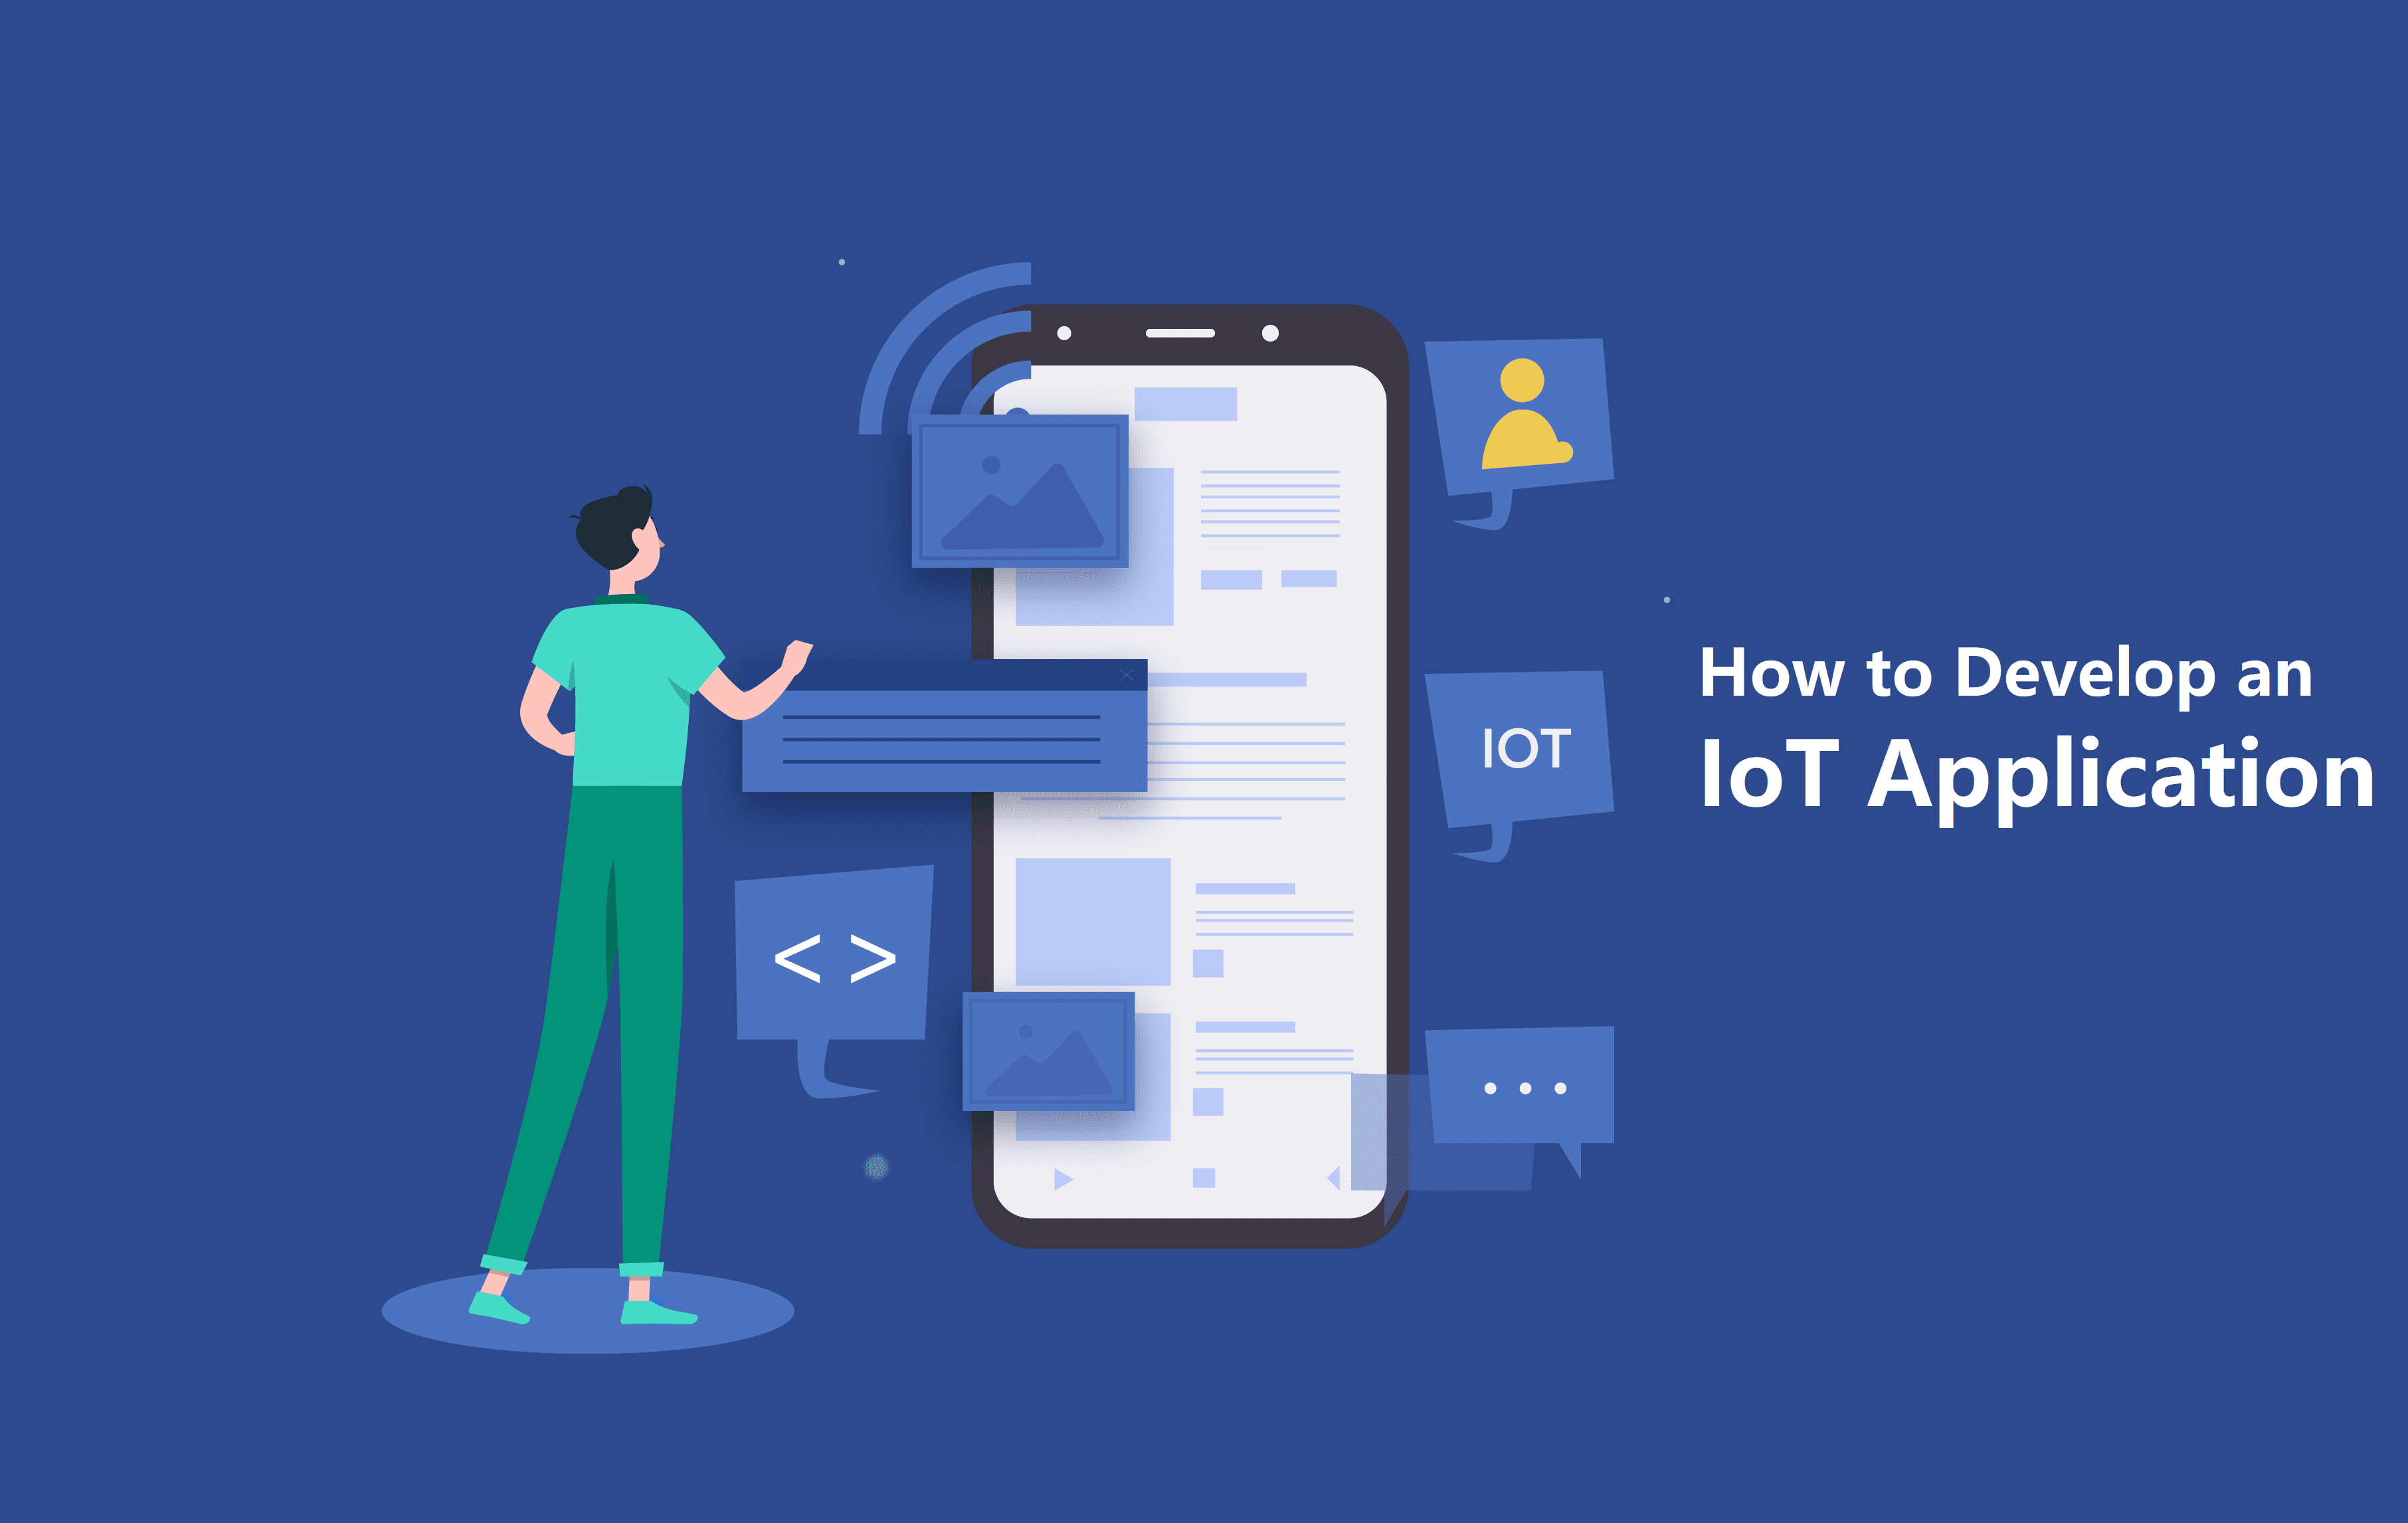 How to develop an IoT application